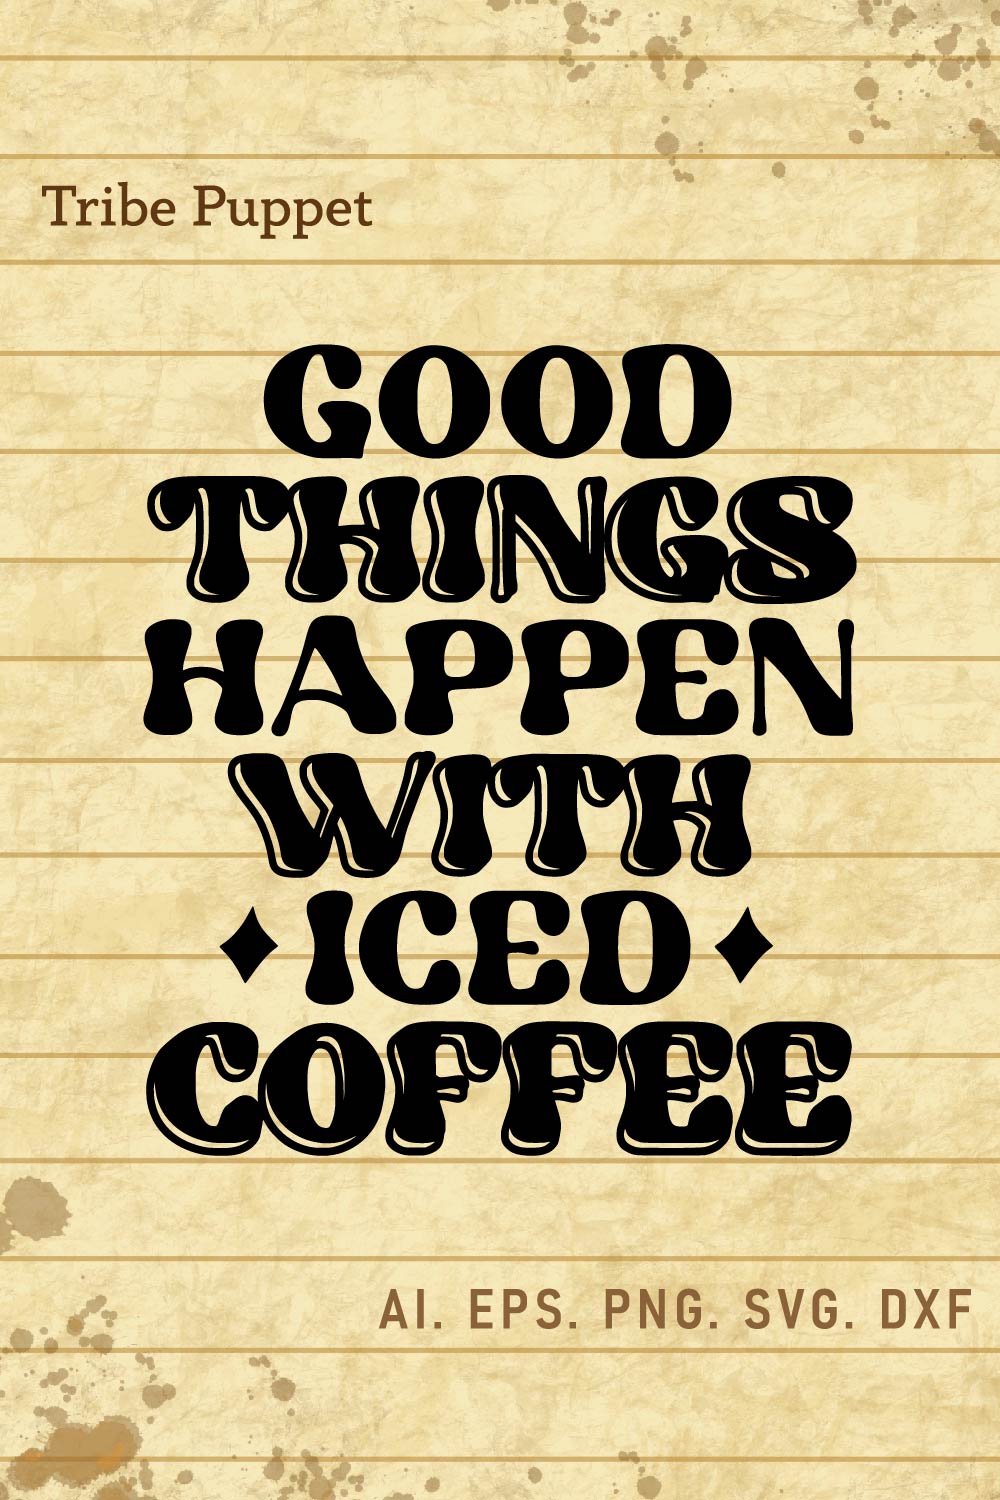 Coffee Quotes pinterest preview image.